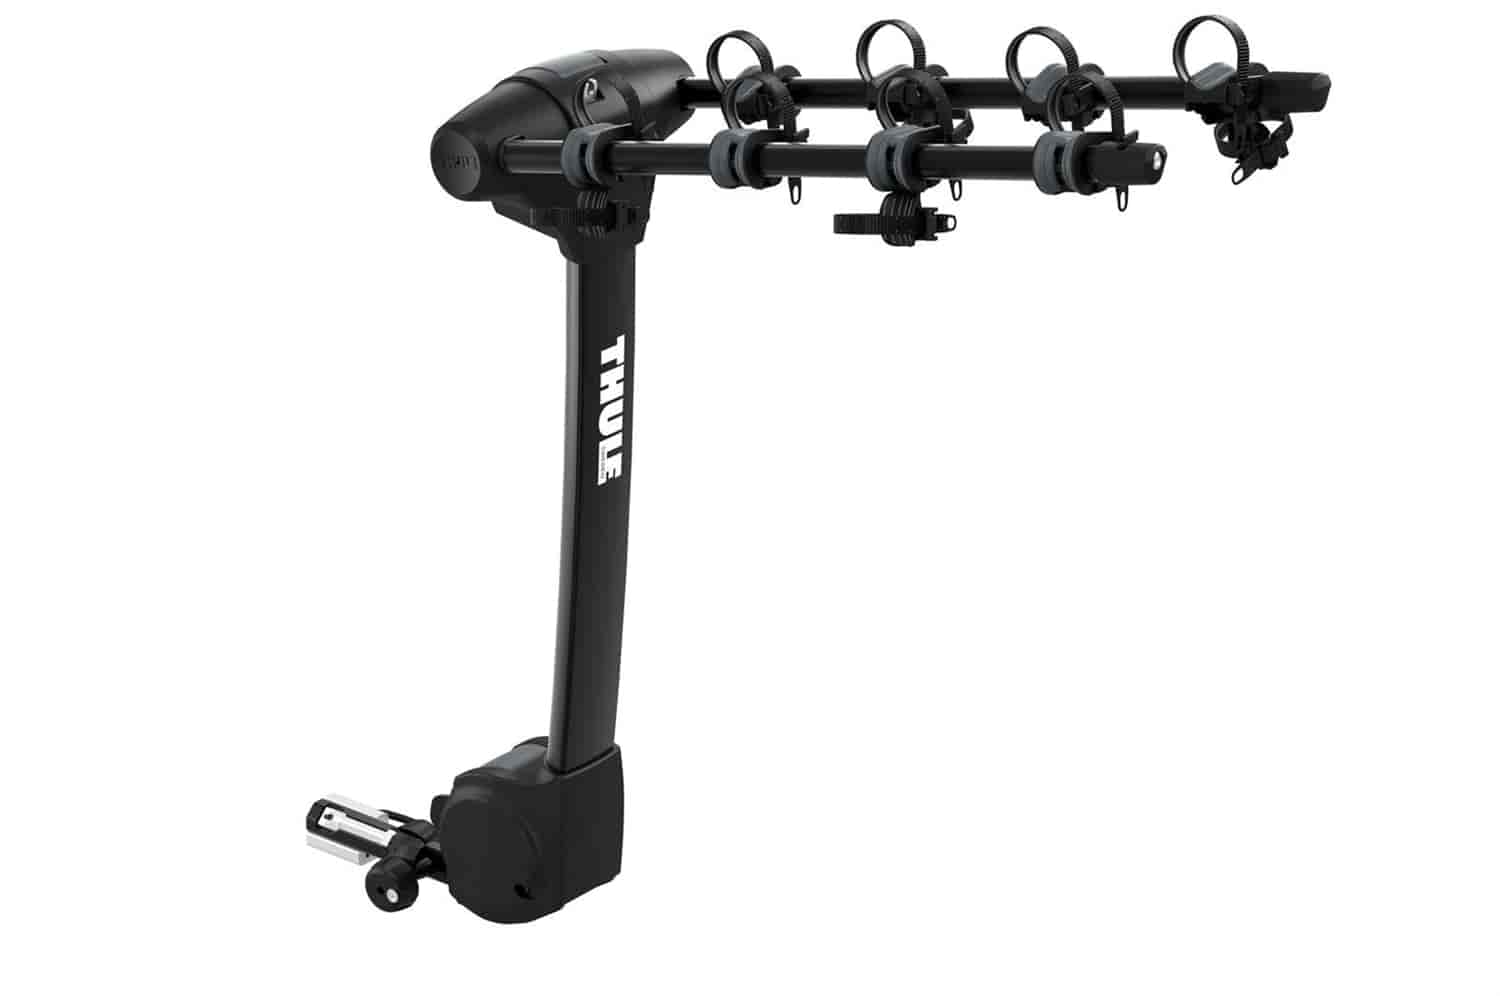 Apex XT 4 Hitch-Mount Hanging Bike Rack Carrier for 4 Bicycles